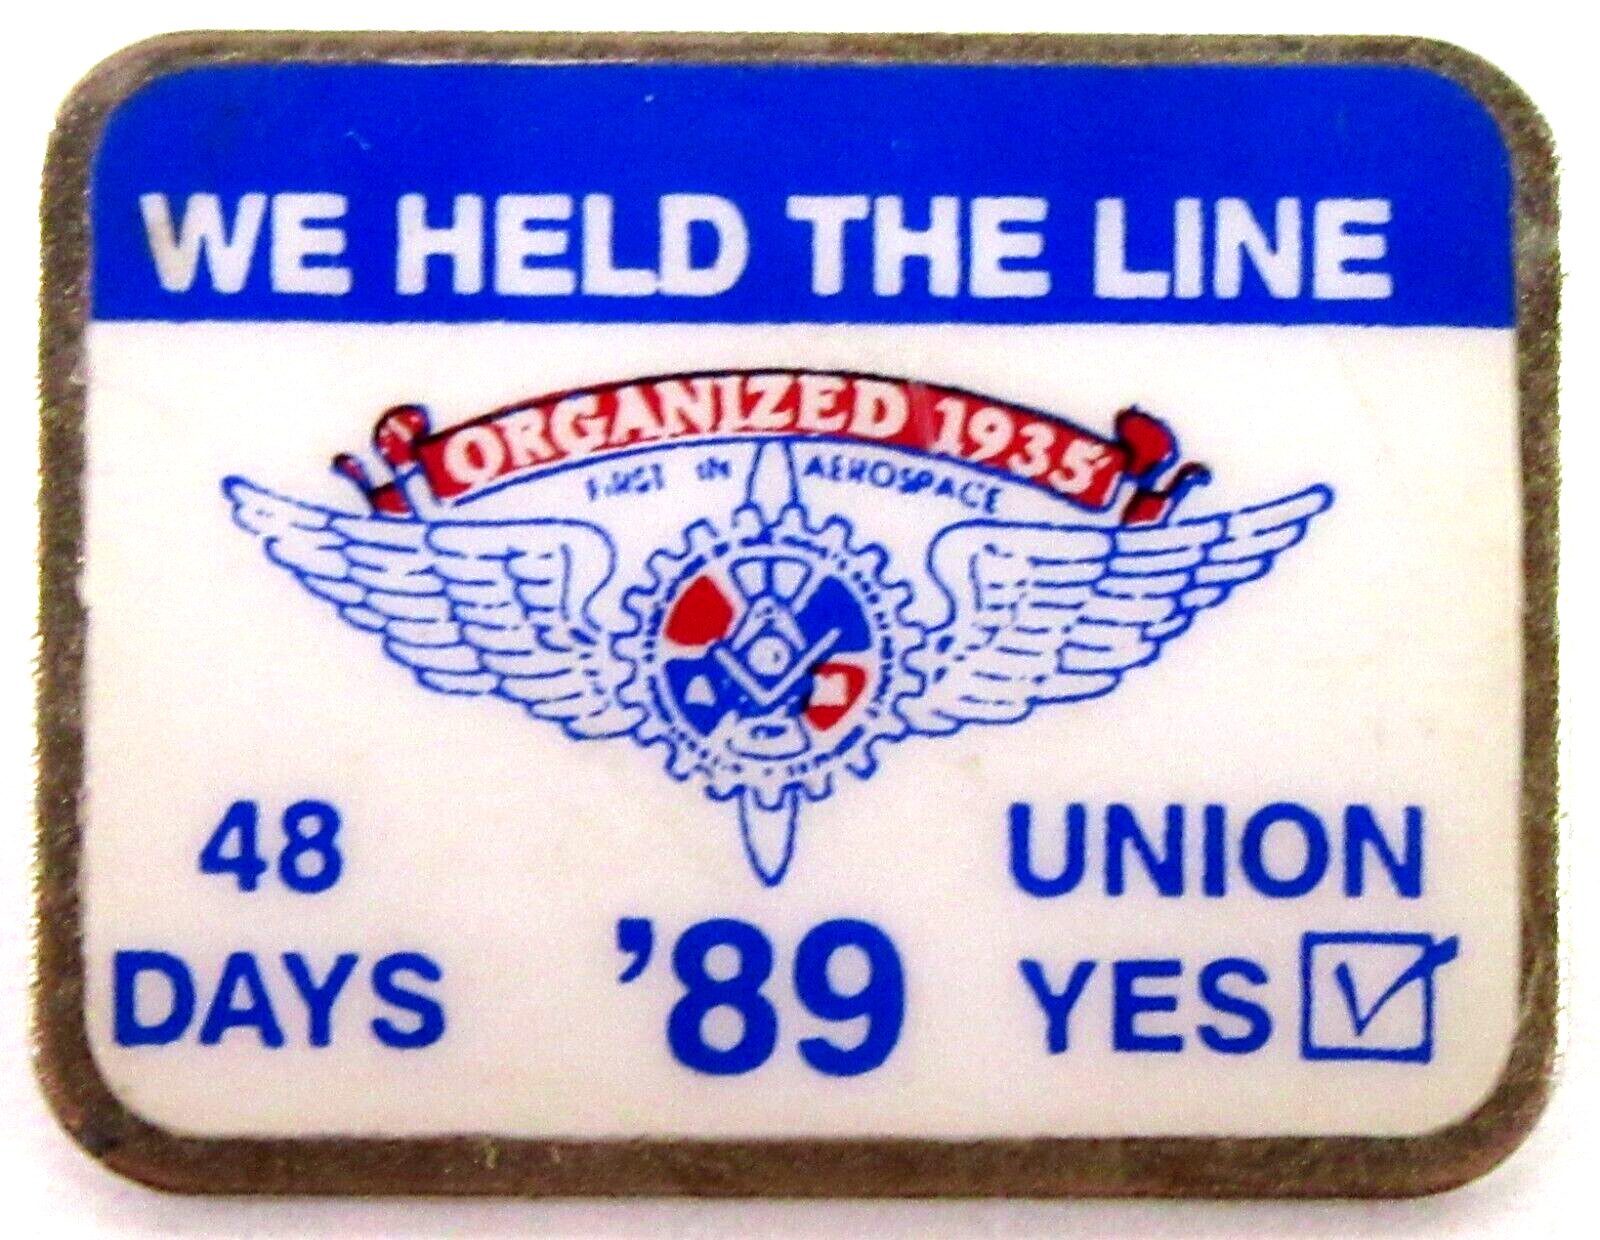 AEROSPACE UNION 1989 WE HELD THE LINE 48 DAYS Boeing tack pin pinback button